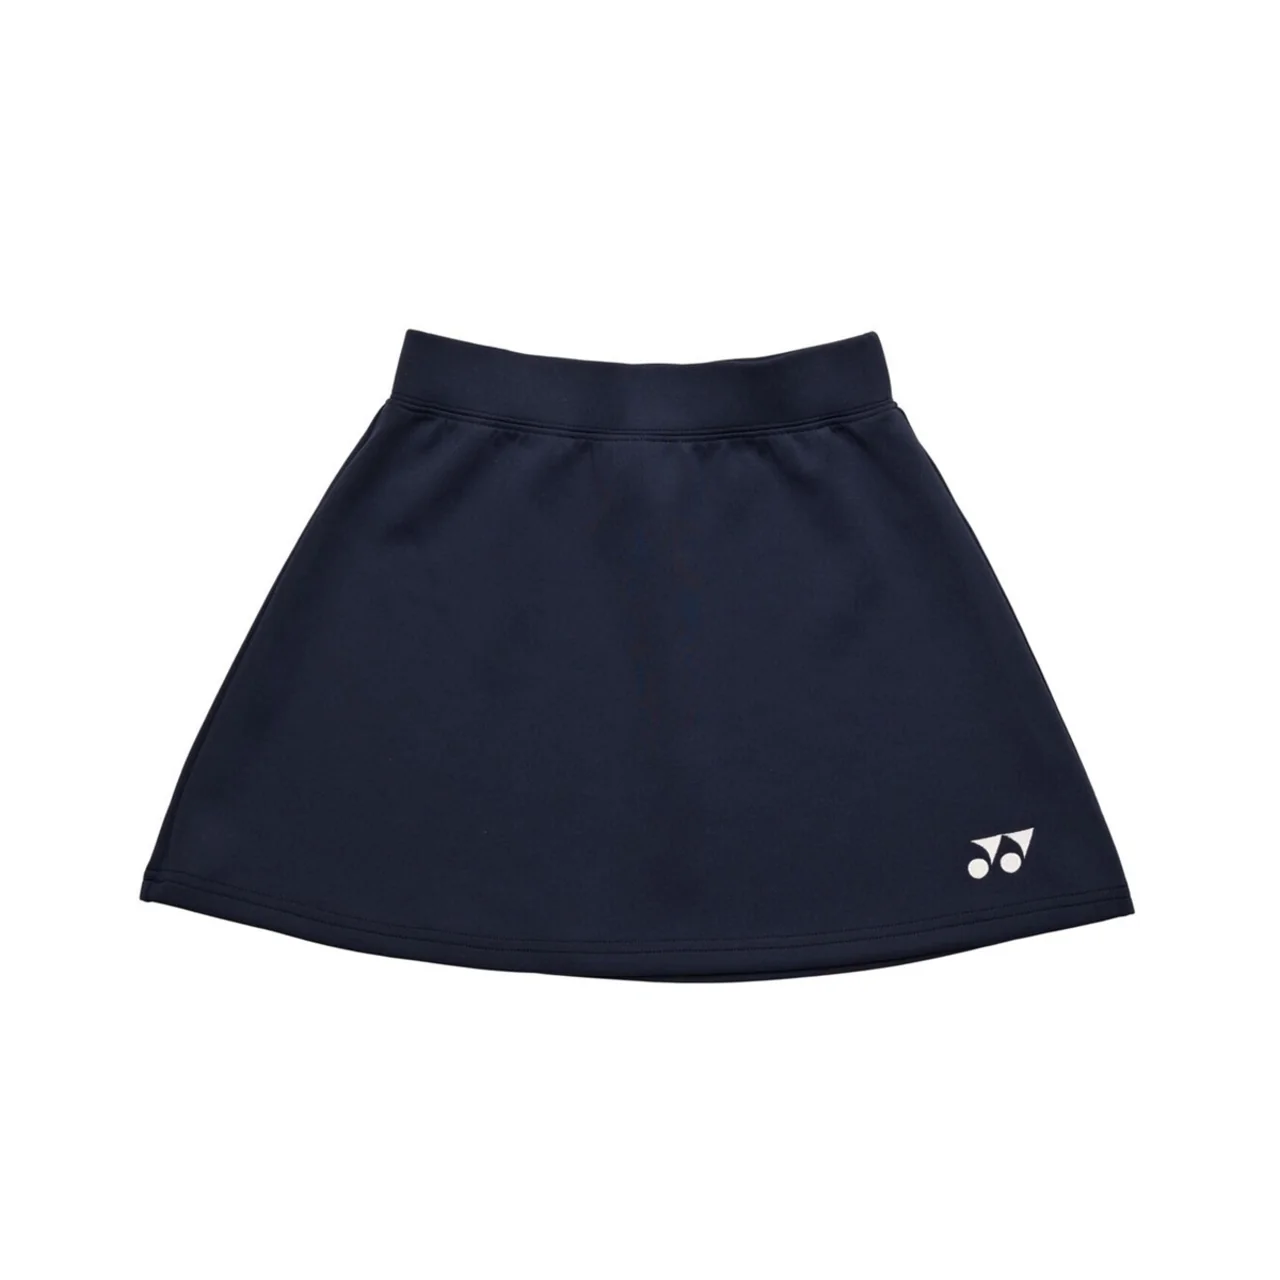 Yonex Womens Skirt Navy (with underpants)